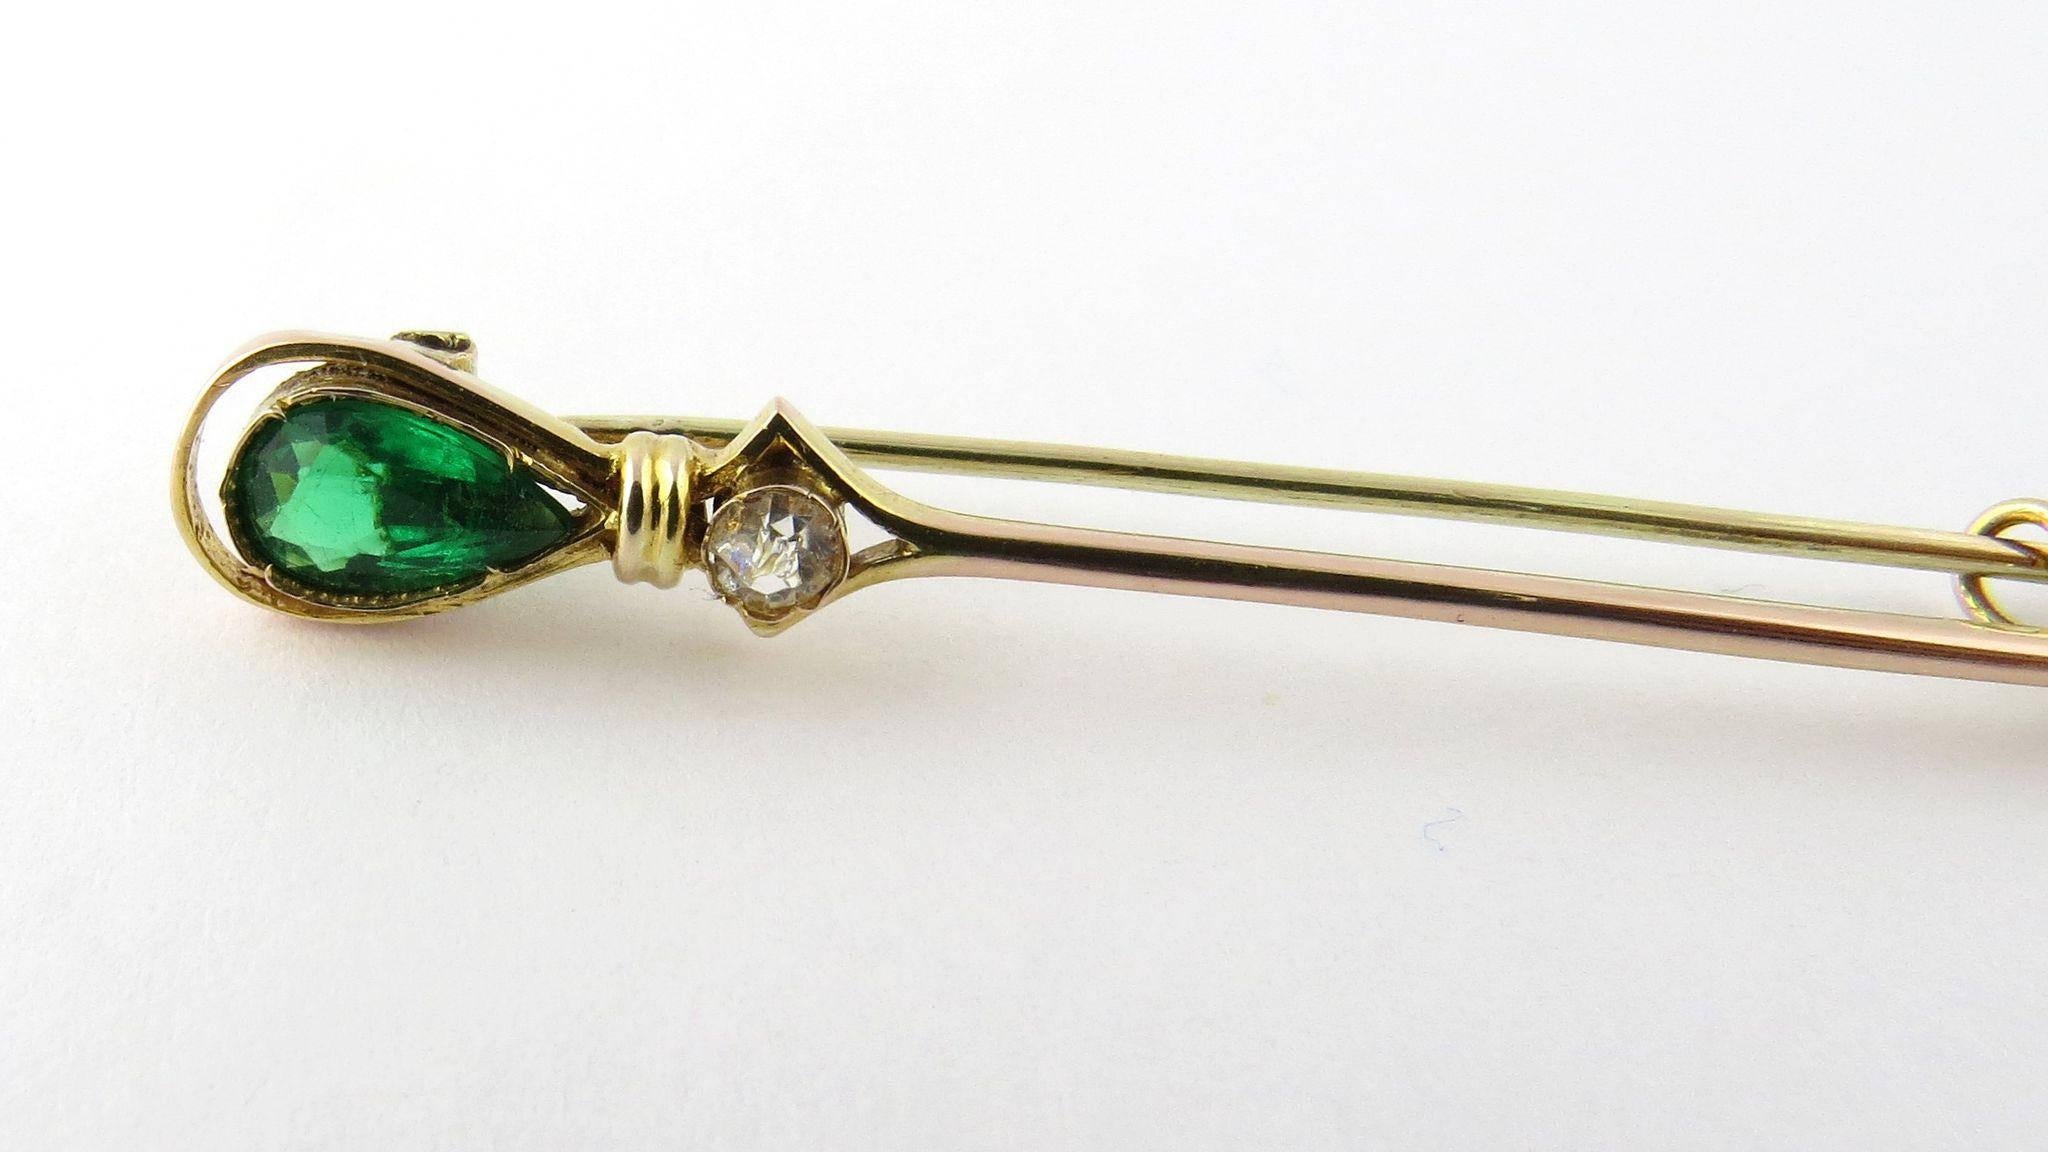 Antique 10 Karat Yellow Gold Pin with Emerald and White Sapphire 1